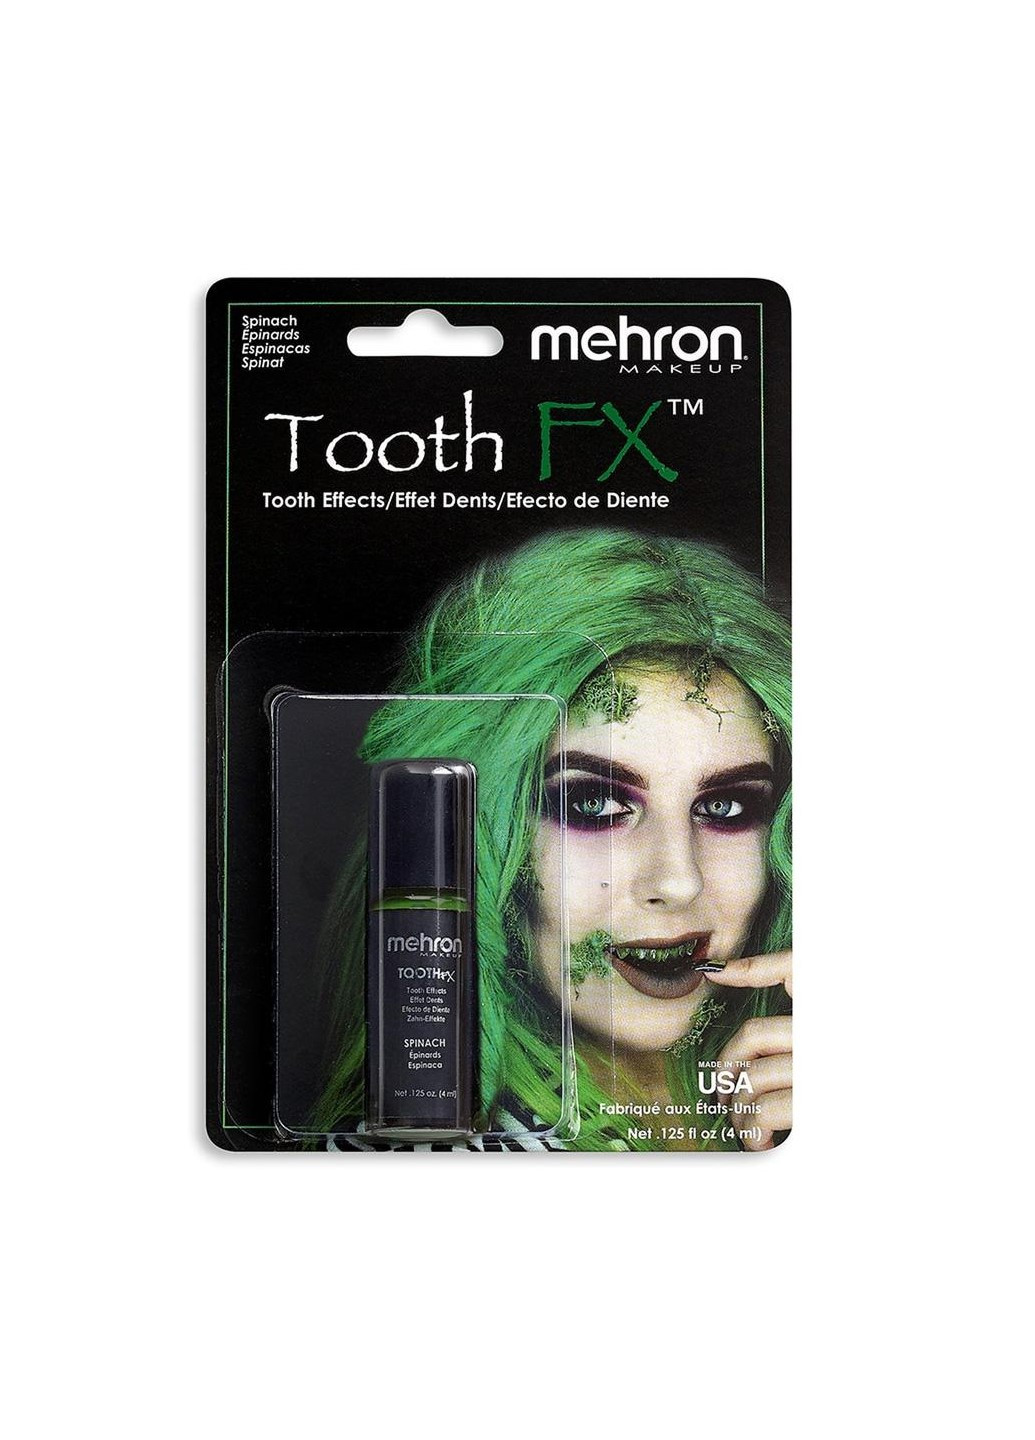 Краска для зубов Tooth FX with Brush for Special Effects - Spinach (Шпинат), 4 мл Mehron (205593138)